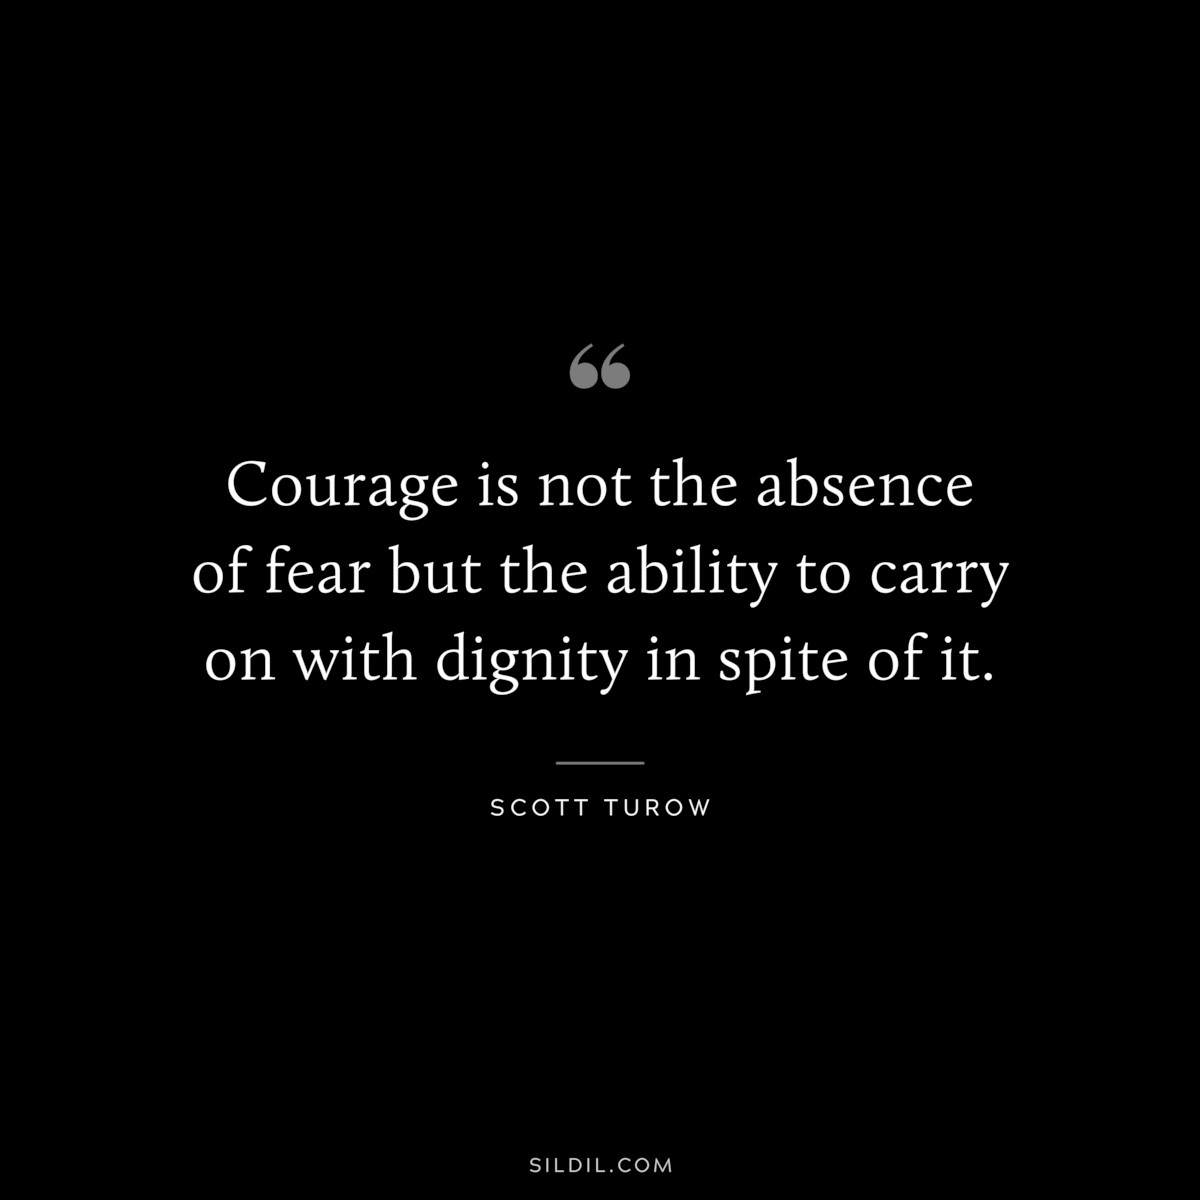 Courage is not the absence of fear but the ability to carry on with dignity in spite of it. ― Scott Turow